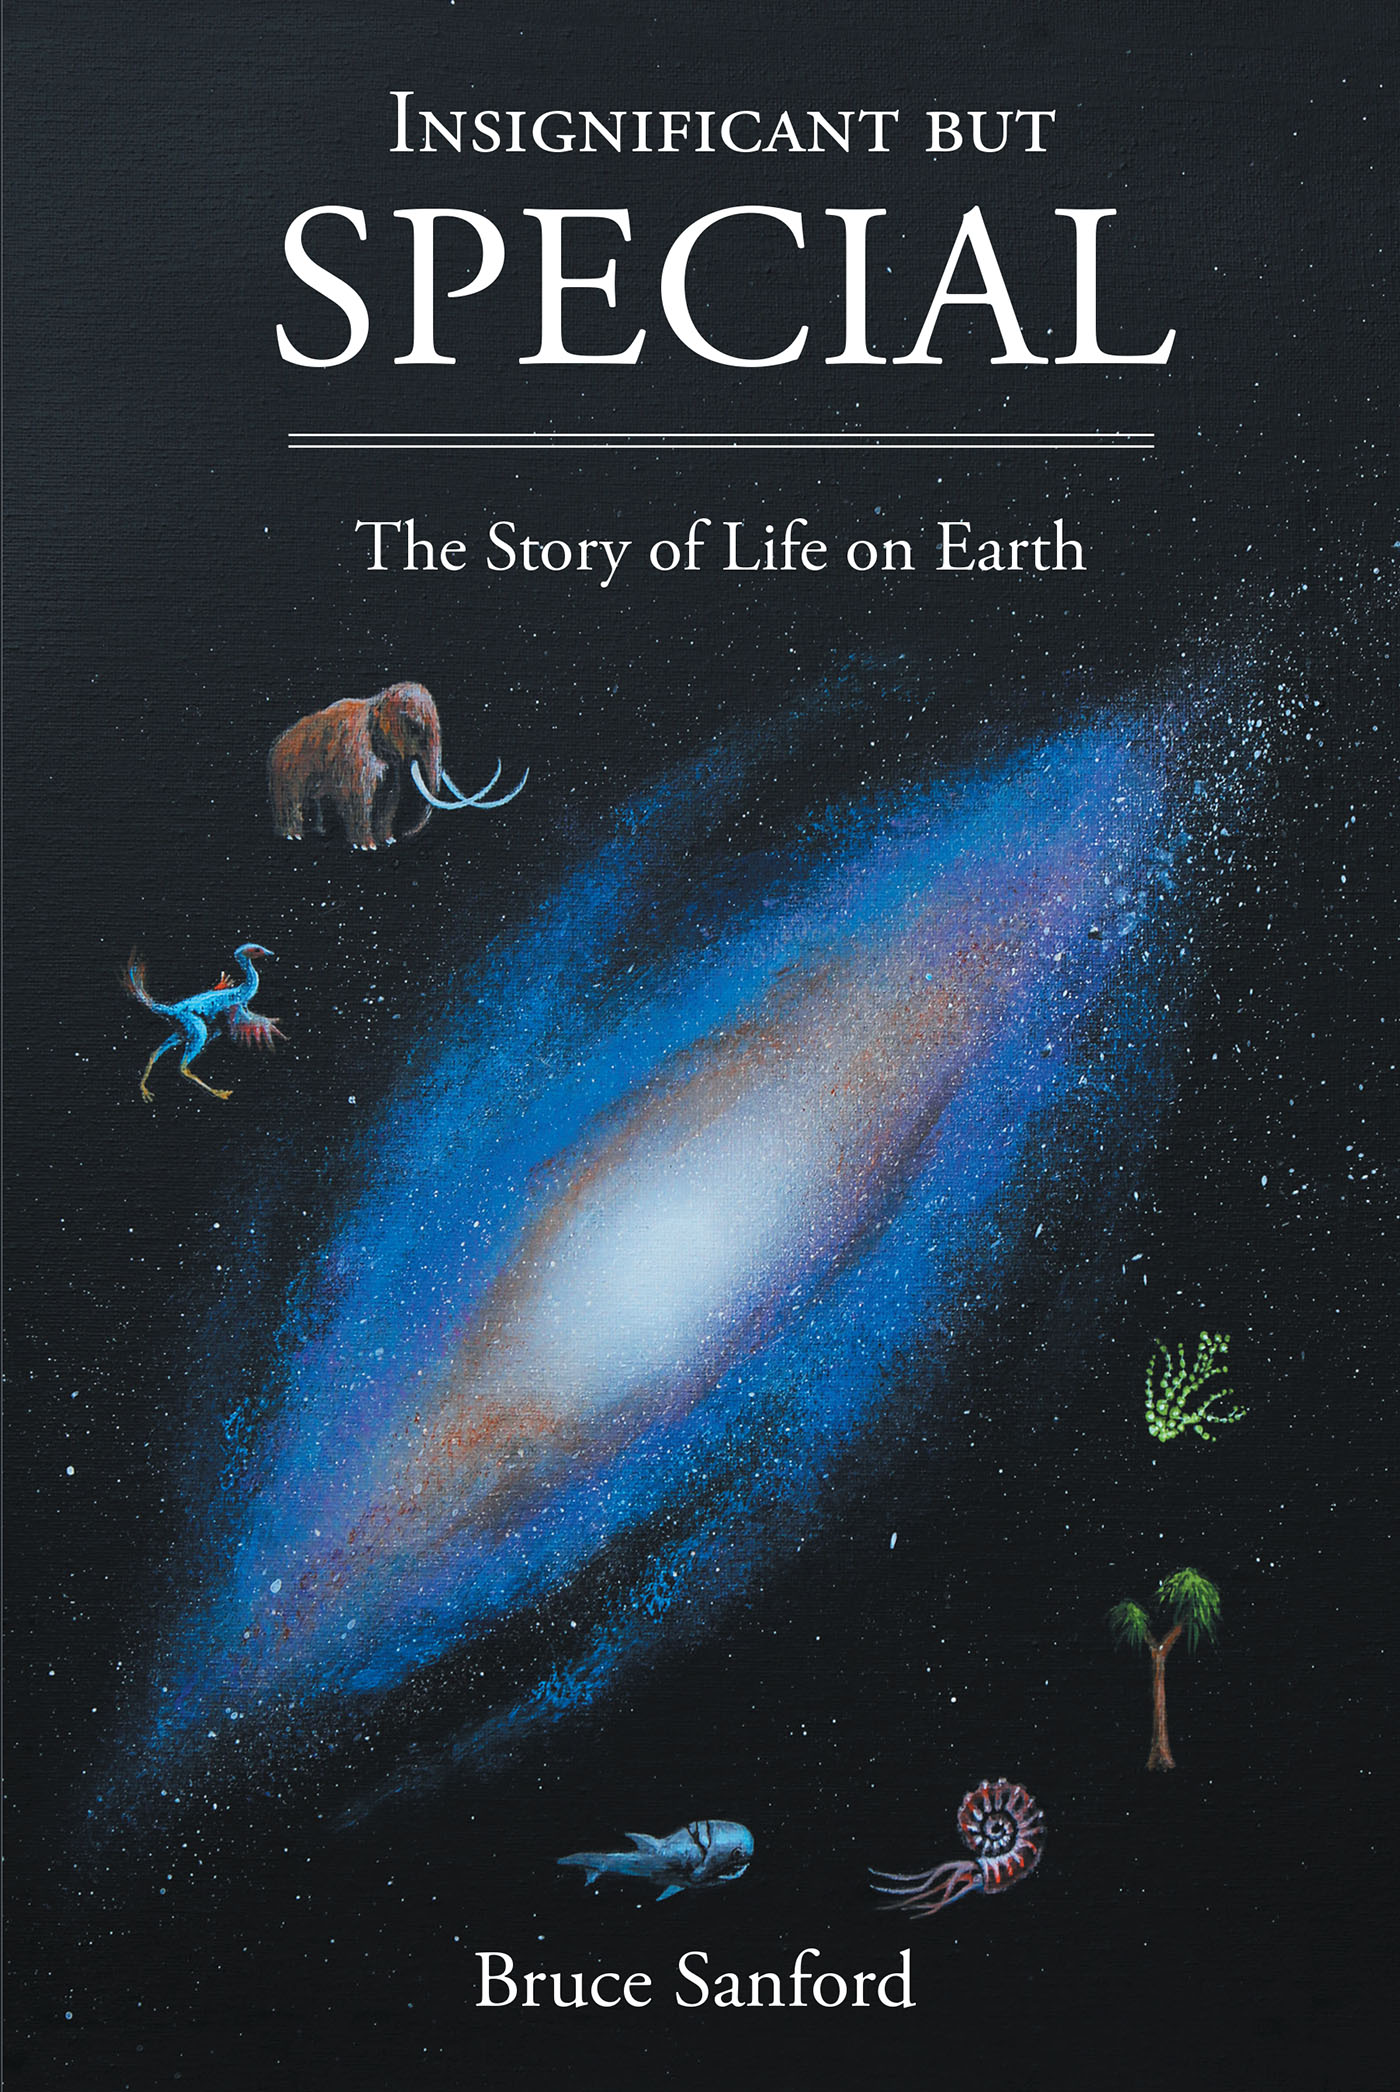 Author Bruce Sanford’s New Book, "Insignificant but Special," Reveals How the First Few Seeds of Life on Earth Have Led to the Present Moment in Mankind's History